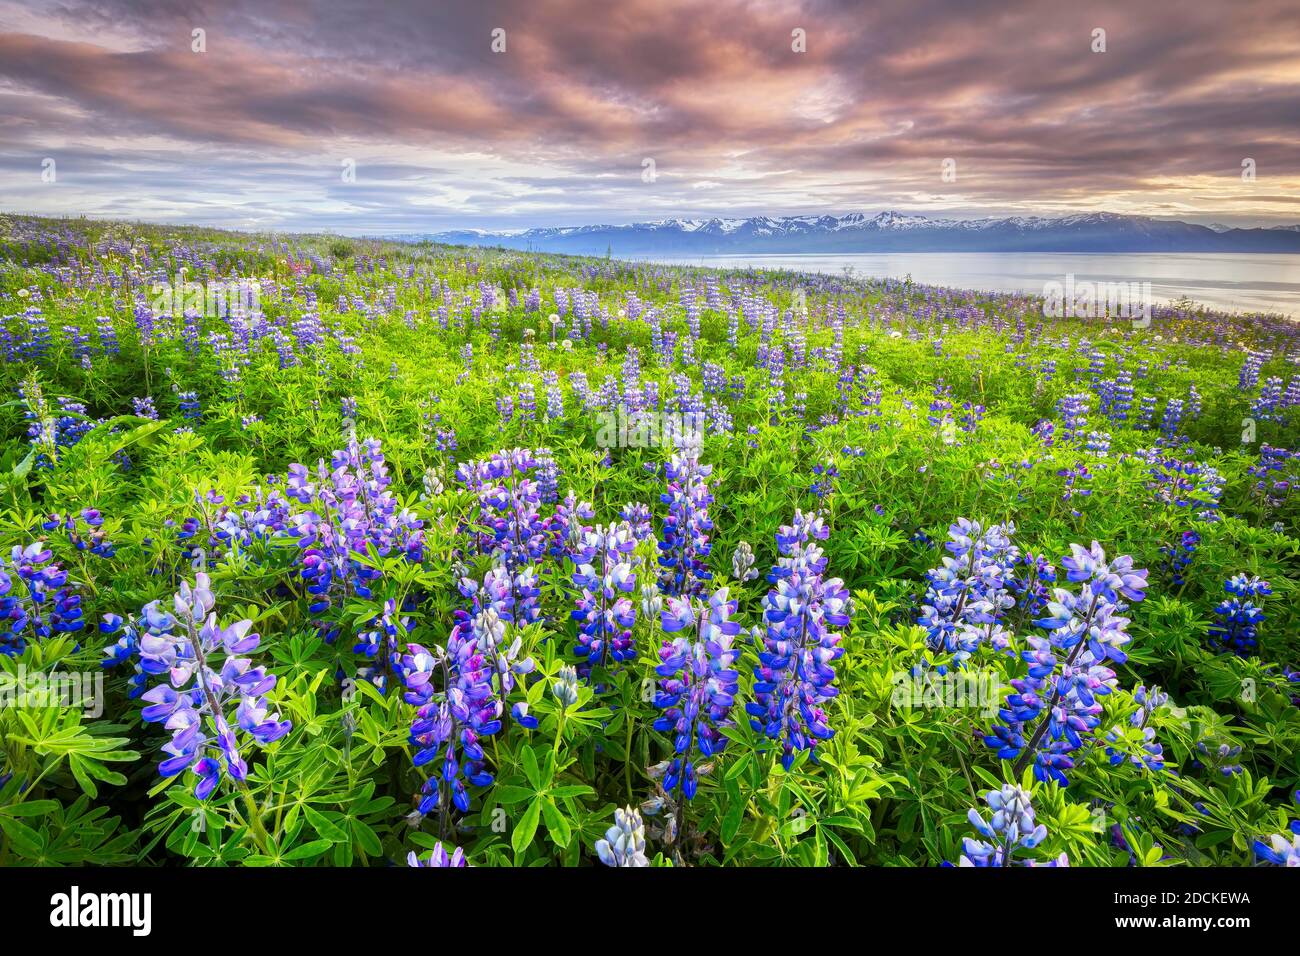 Violet lupins on a hill behind the sea and snow-covered mountains in the evening light with dramatic sky, Norourping, Norourland eystra, Iceland Stock Photo